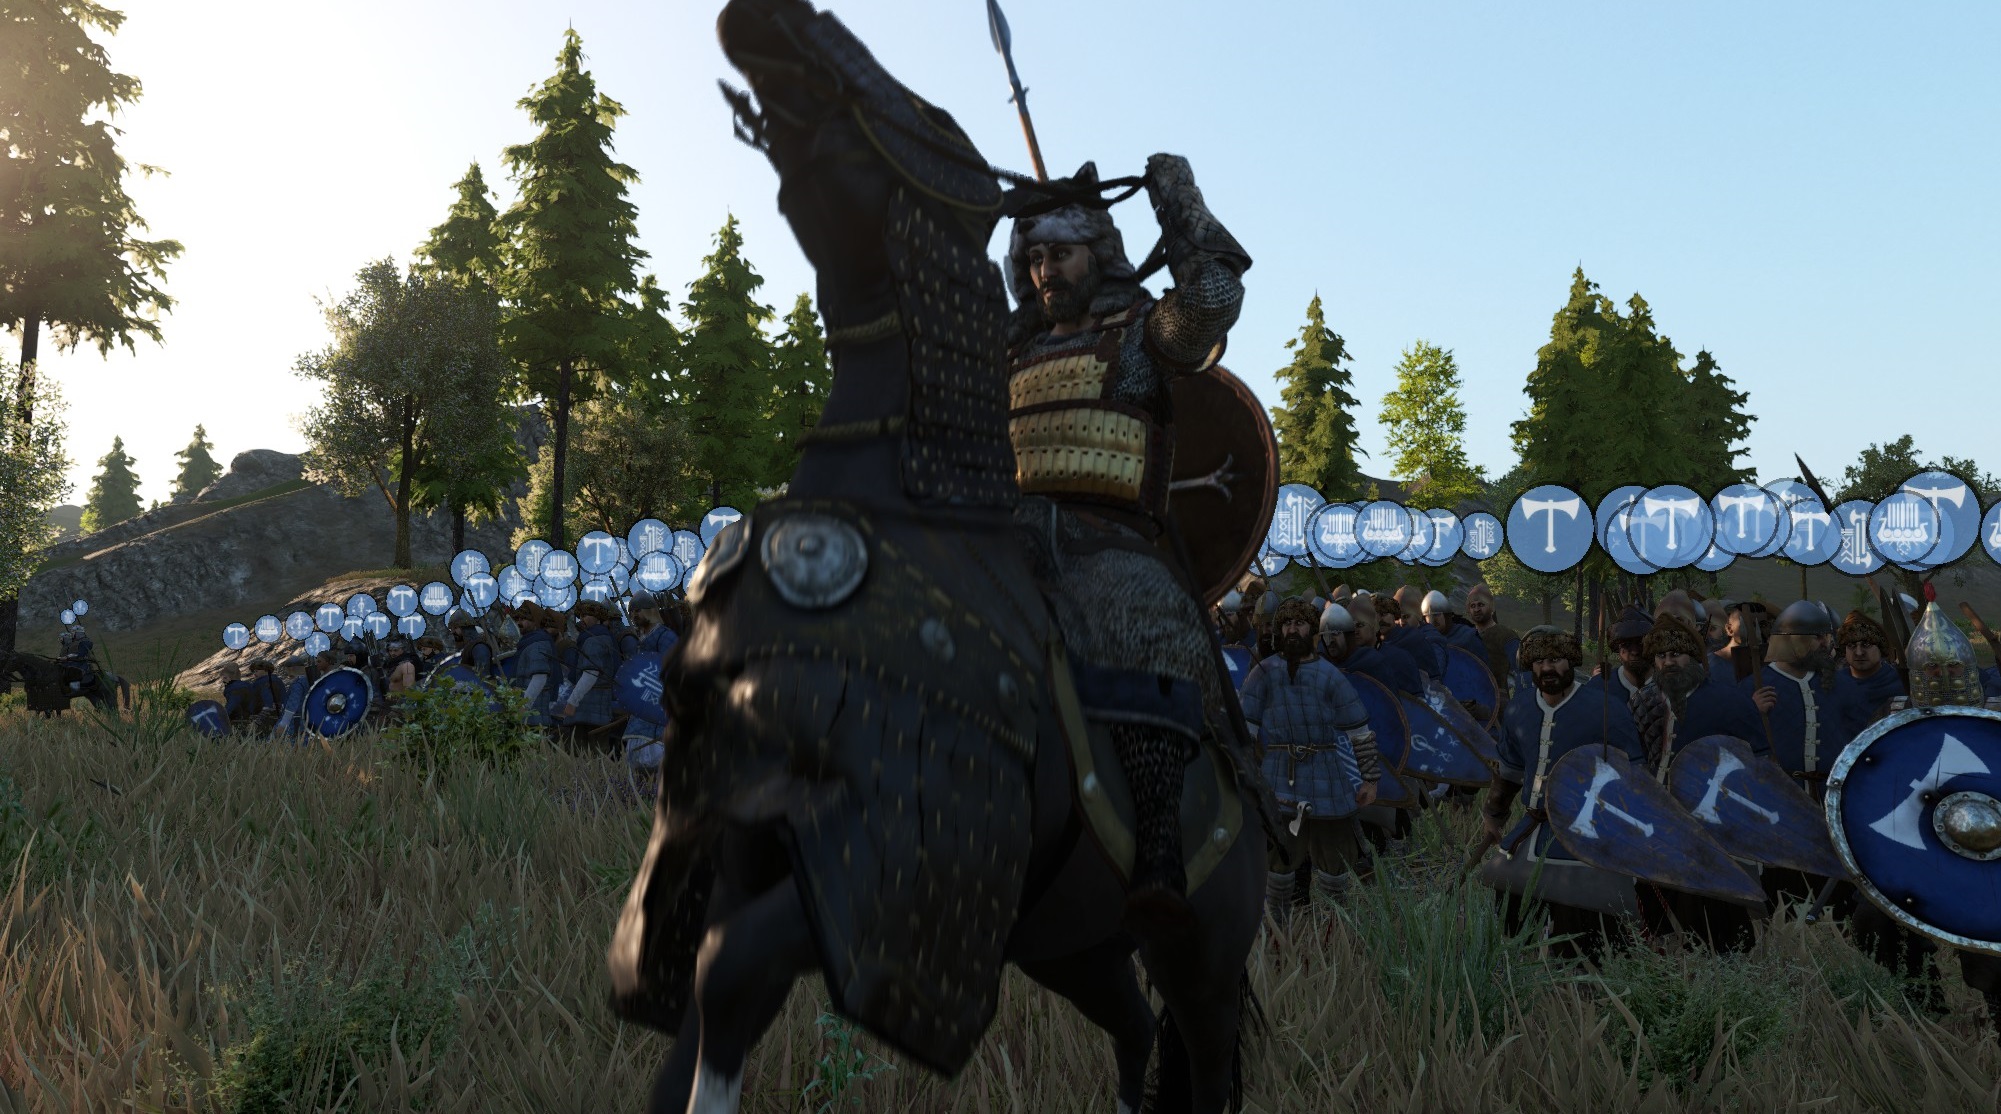 Mount & Blade 2: Bannerlord was worth the wait